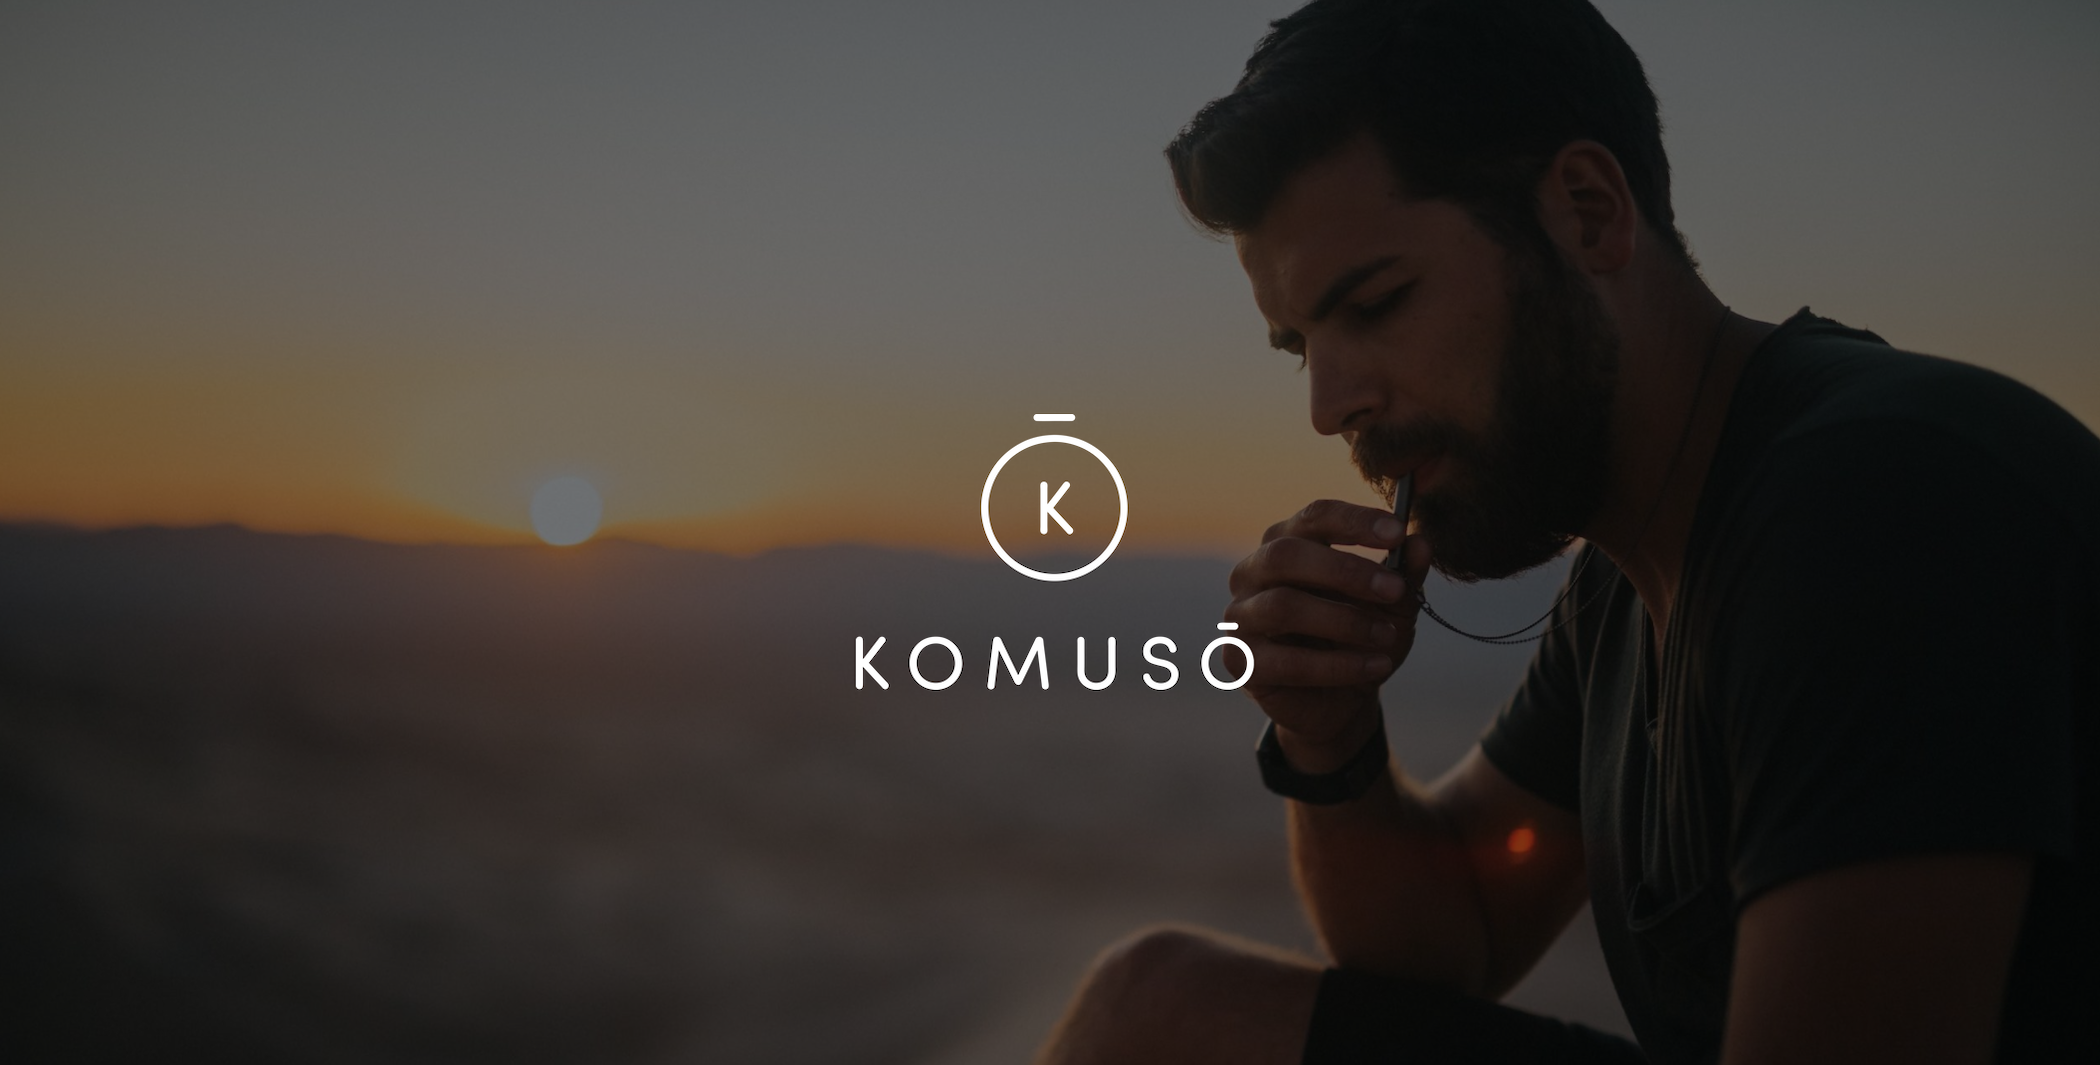 IU C&I Studios Page Branding services for Komuso Design White Komuso logo with dimmed background of a bearded man blowing a whistle with a view of the sun setting in the valley behind him